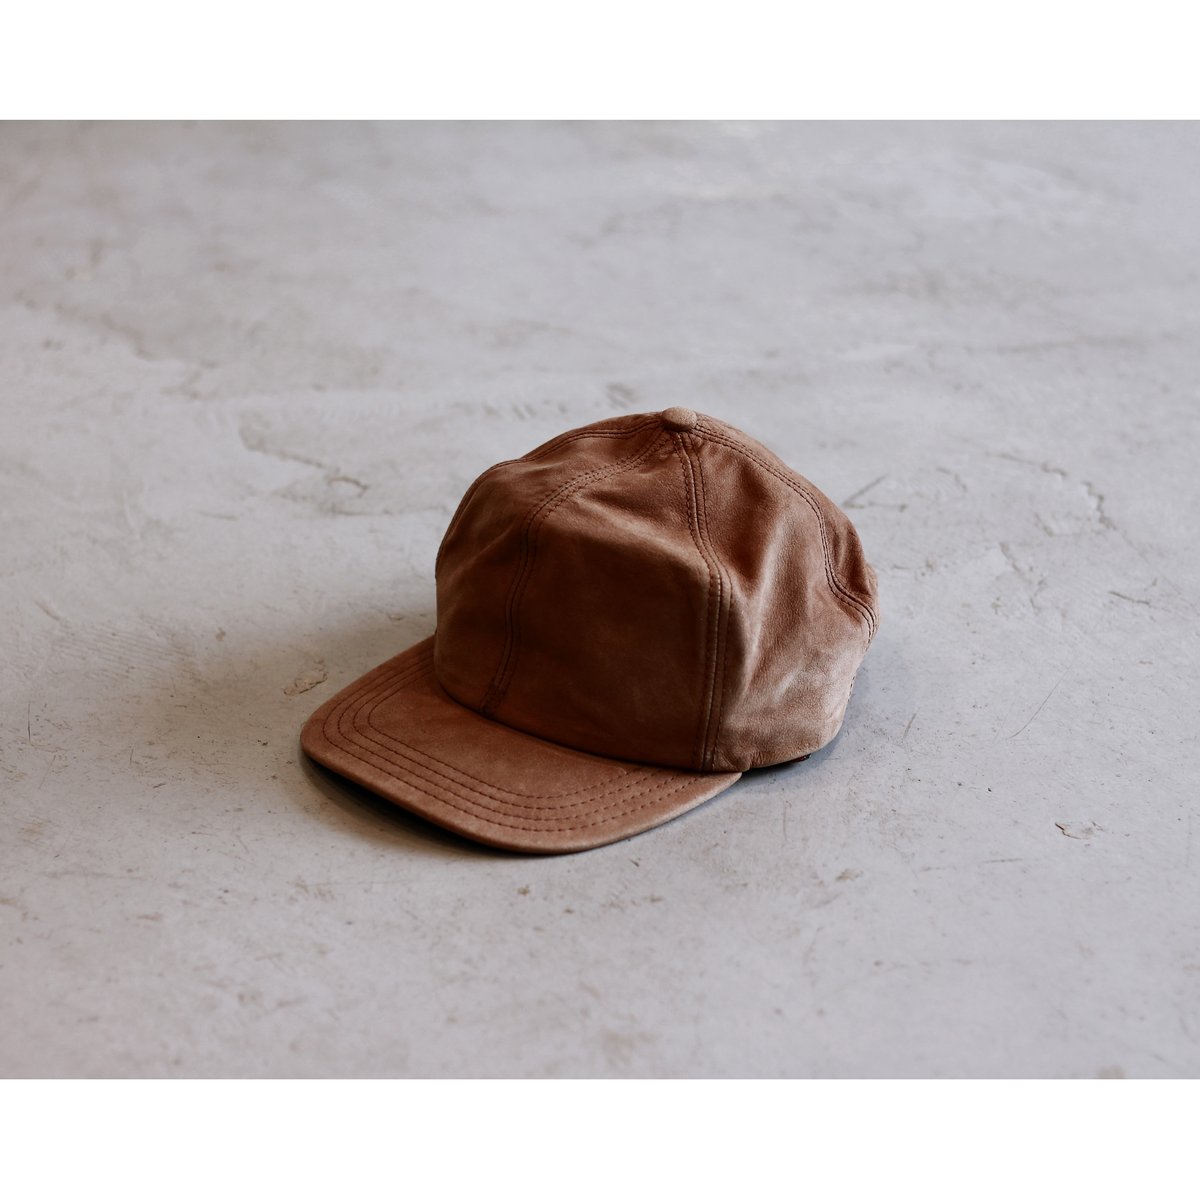 Vintage Leather Cap Made in USA